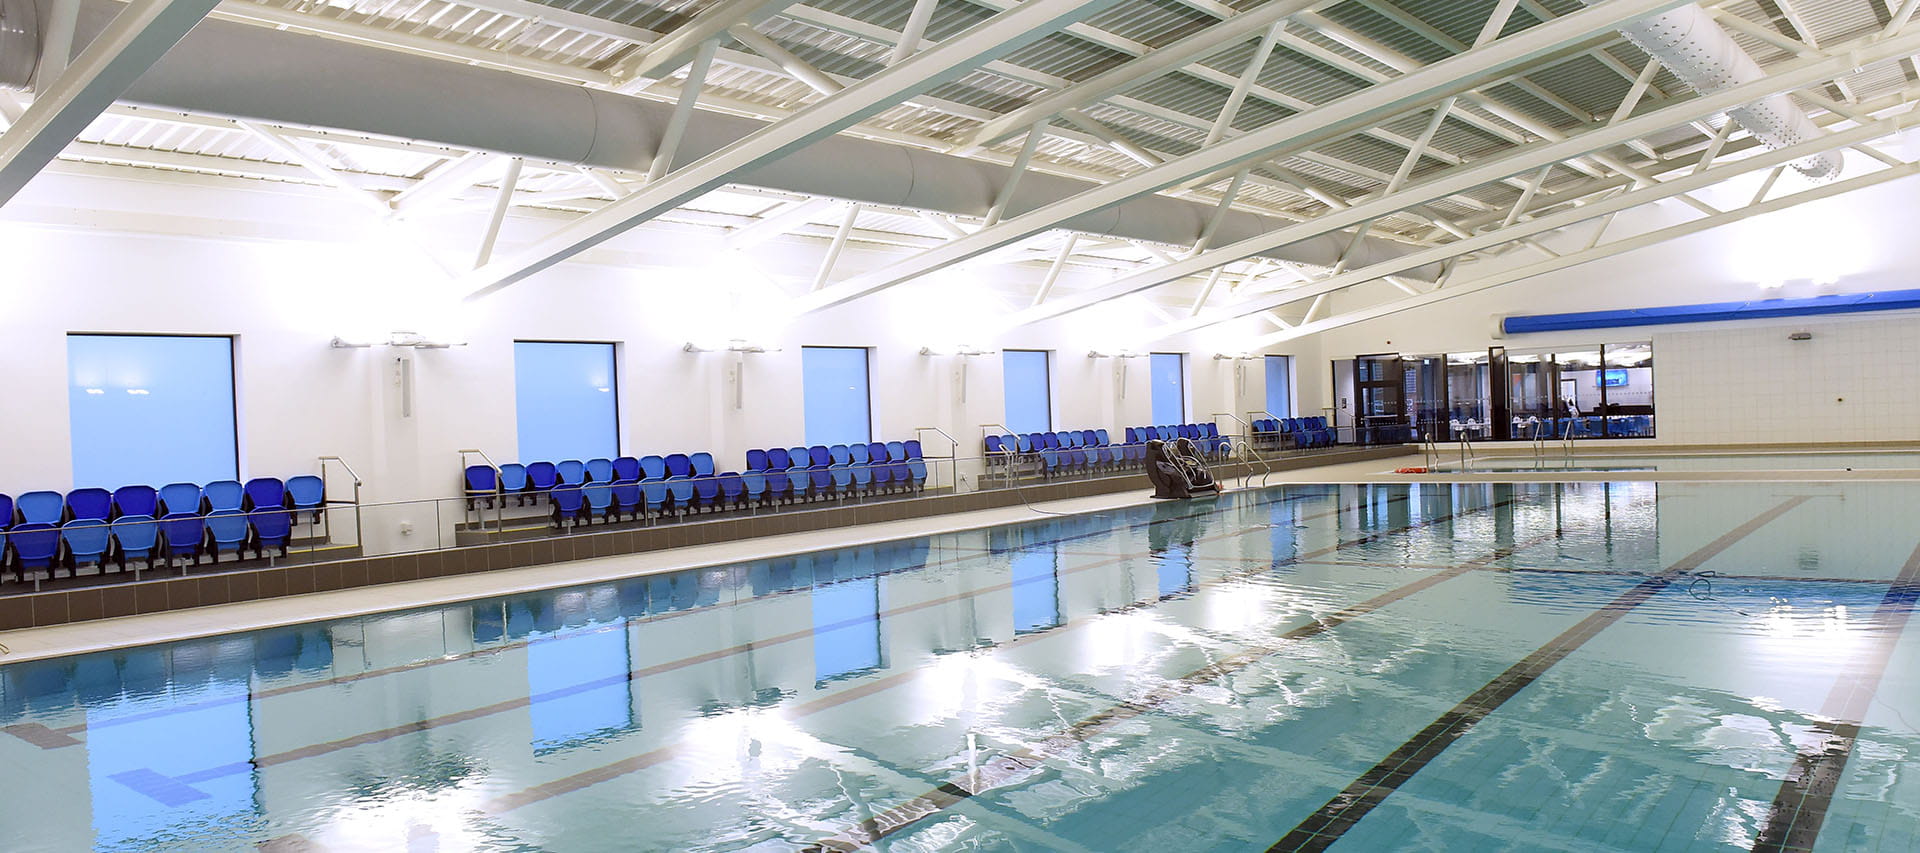 Swimming pool at Duncan Edwards leisure centre